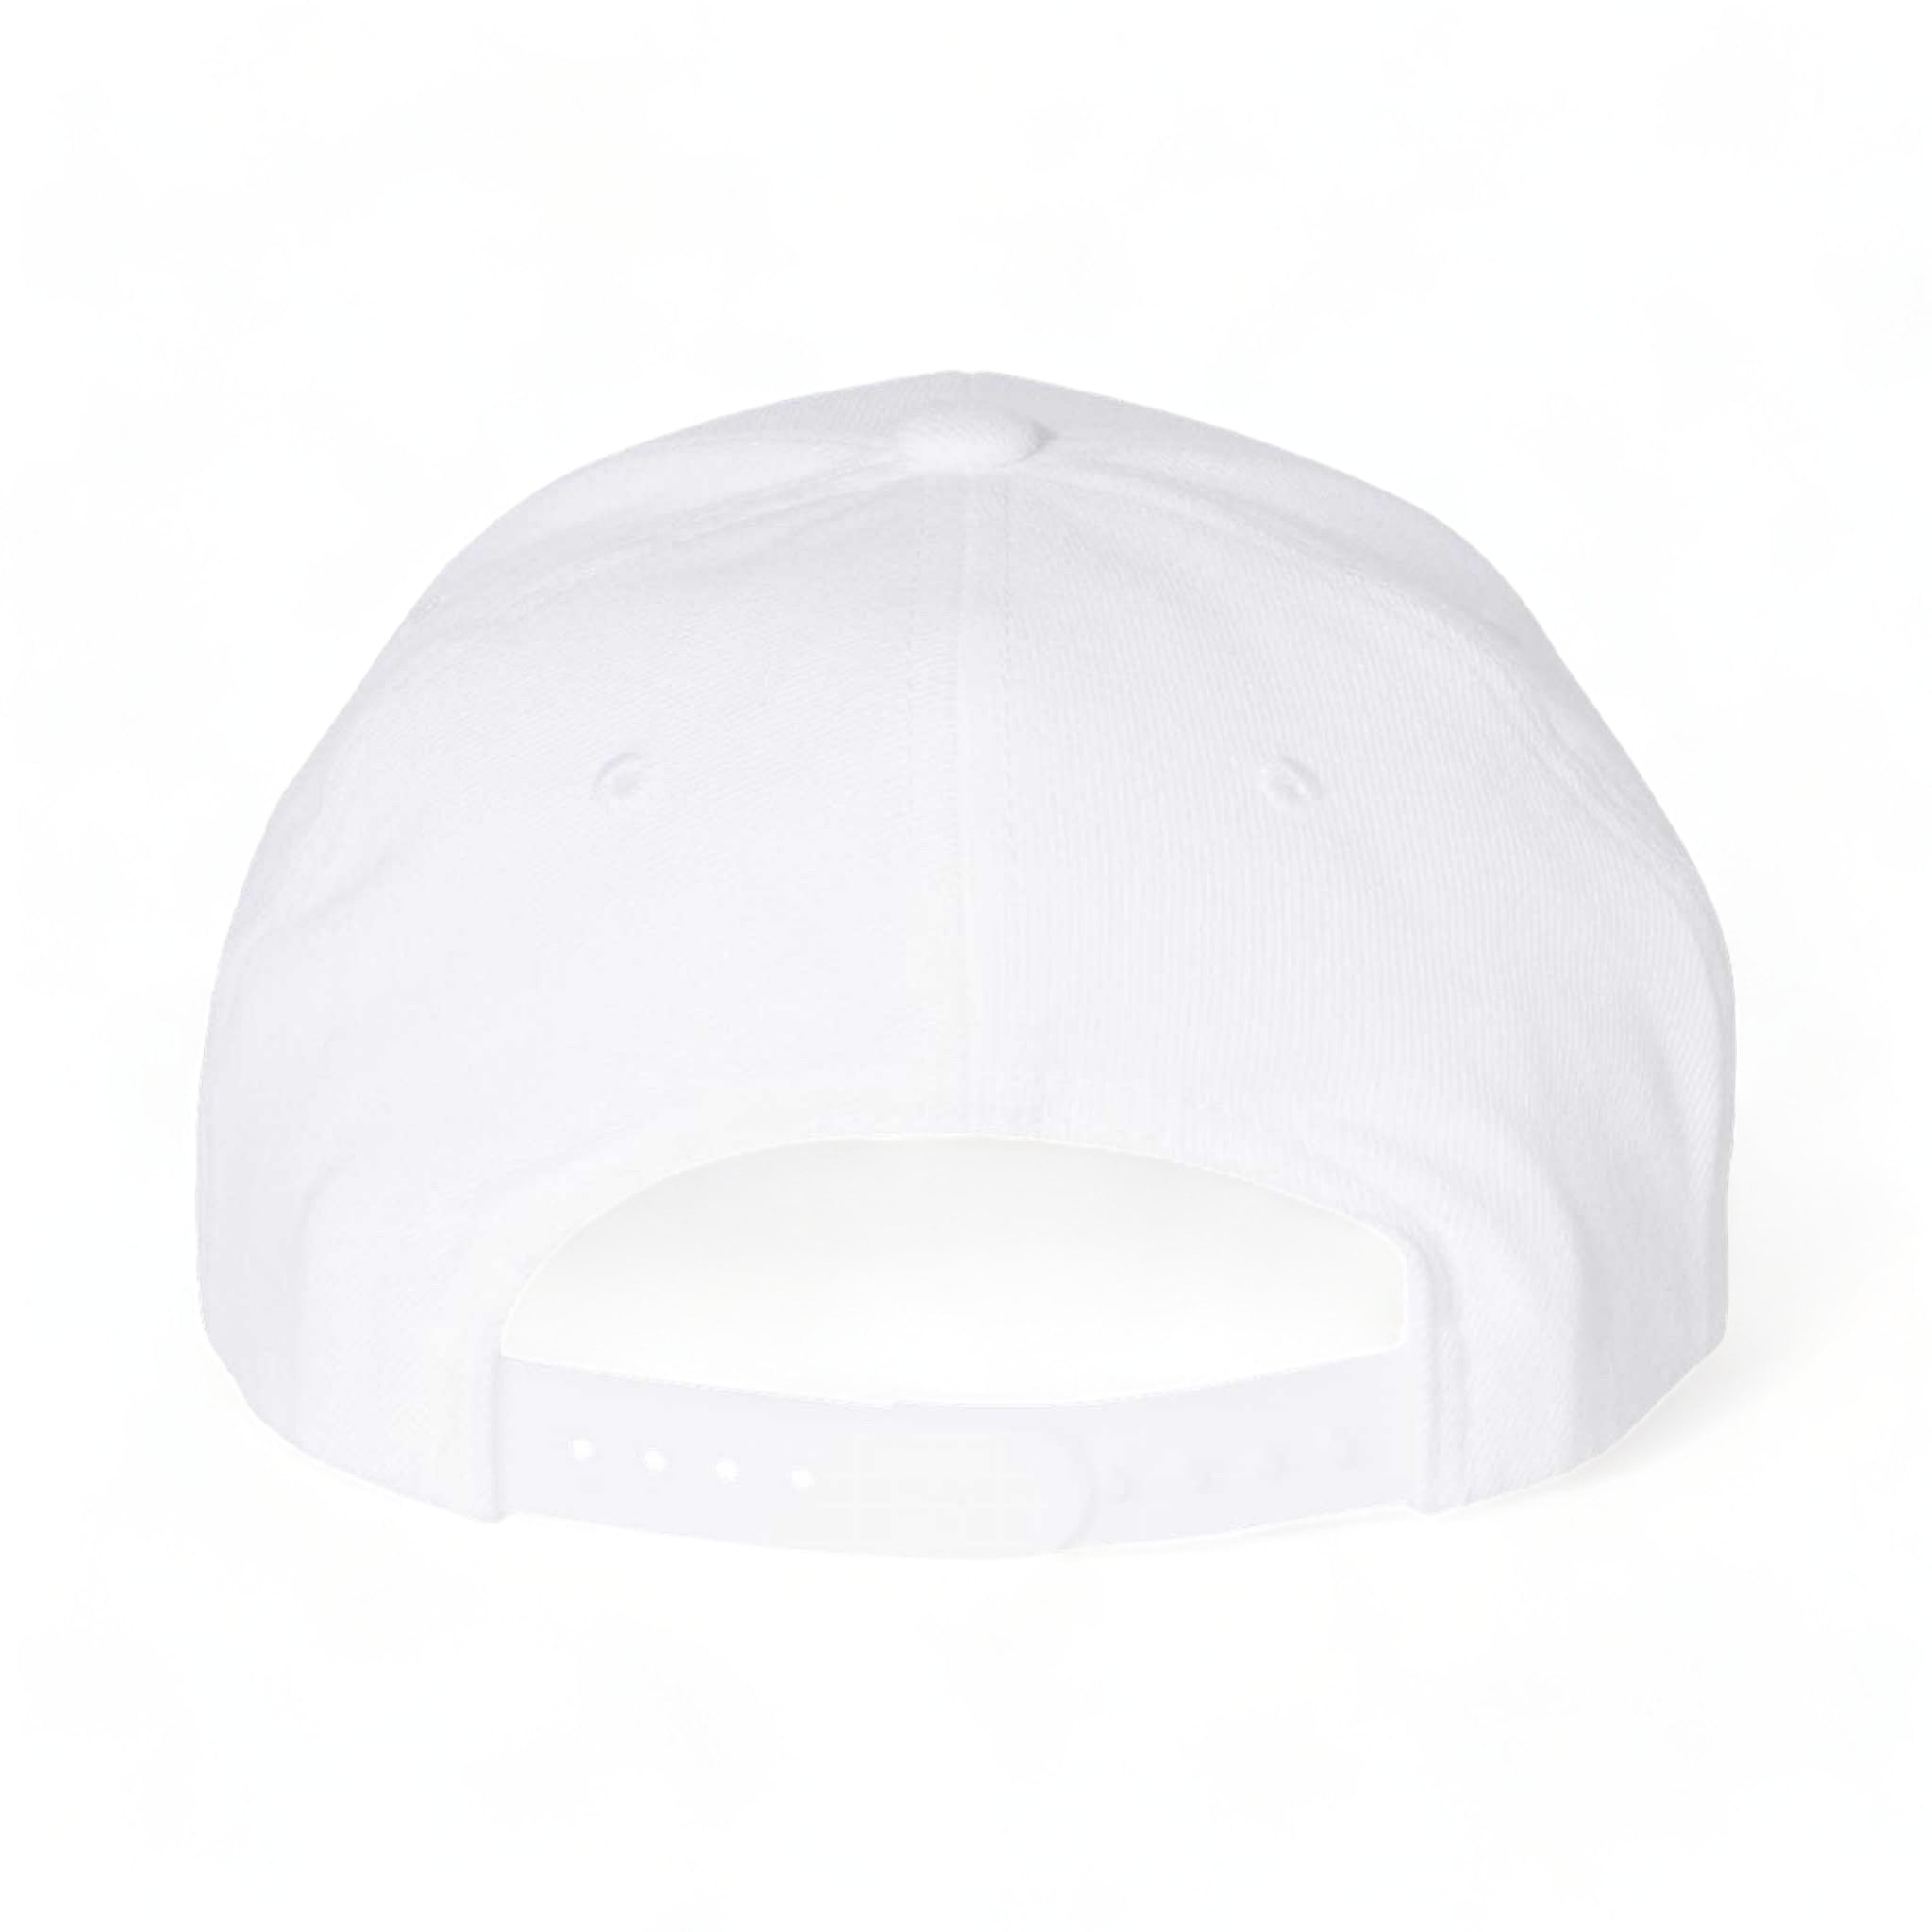 Back view of YP Classics 6789M custom hat in white